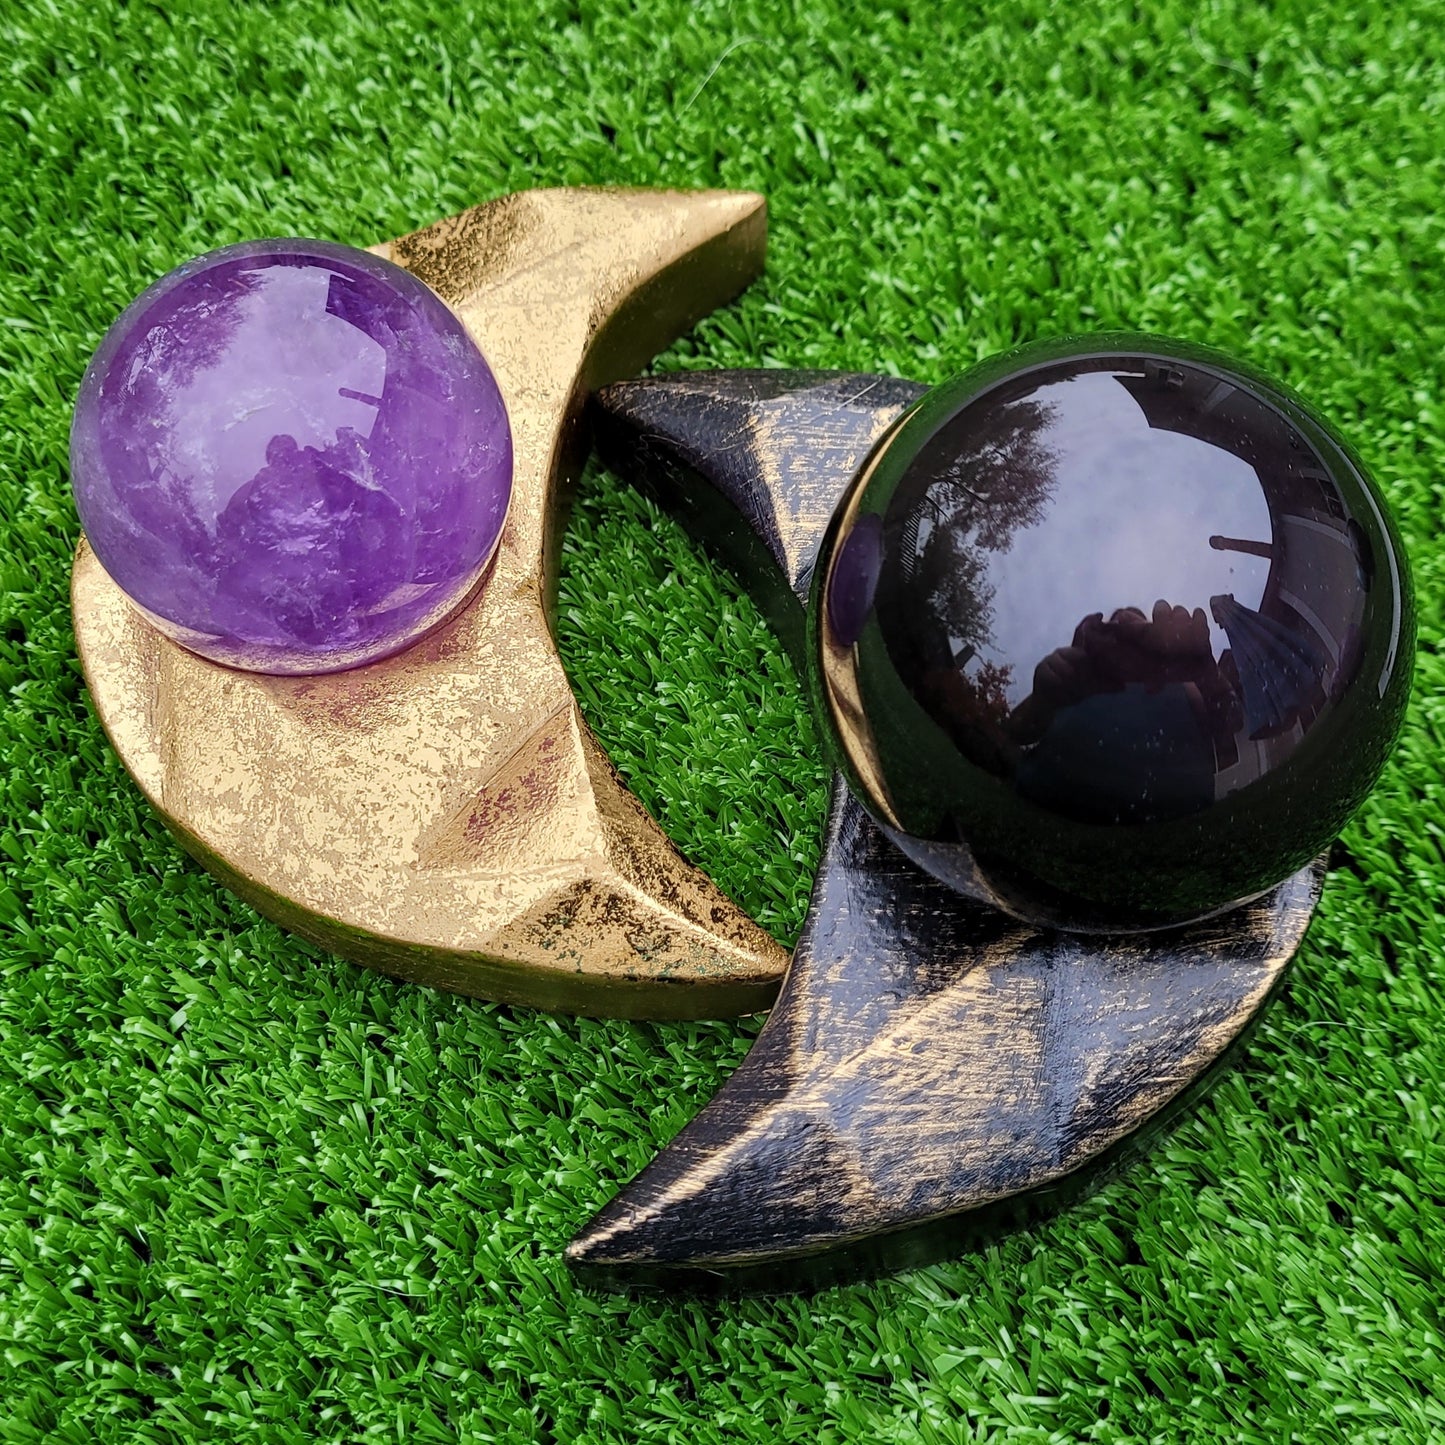 Wood Moon Shaped Sphere Display Stand, in Black and Bronze or Gold, for Crystal Balls or Eggs 2" to 3.5" (50mm to 90mm)